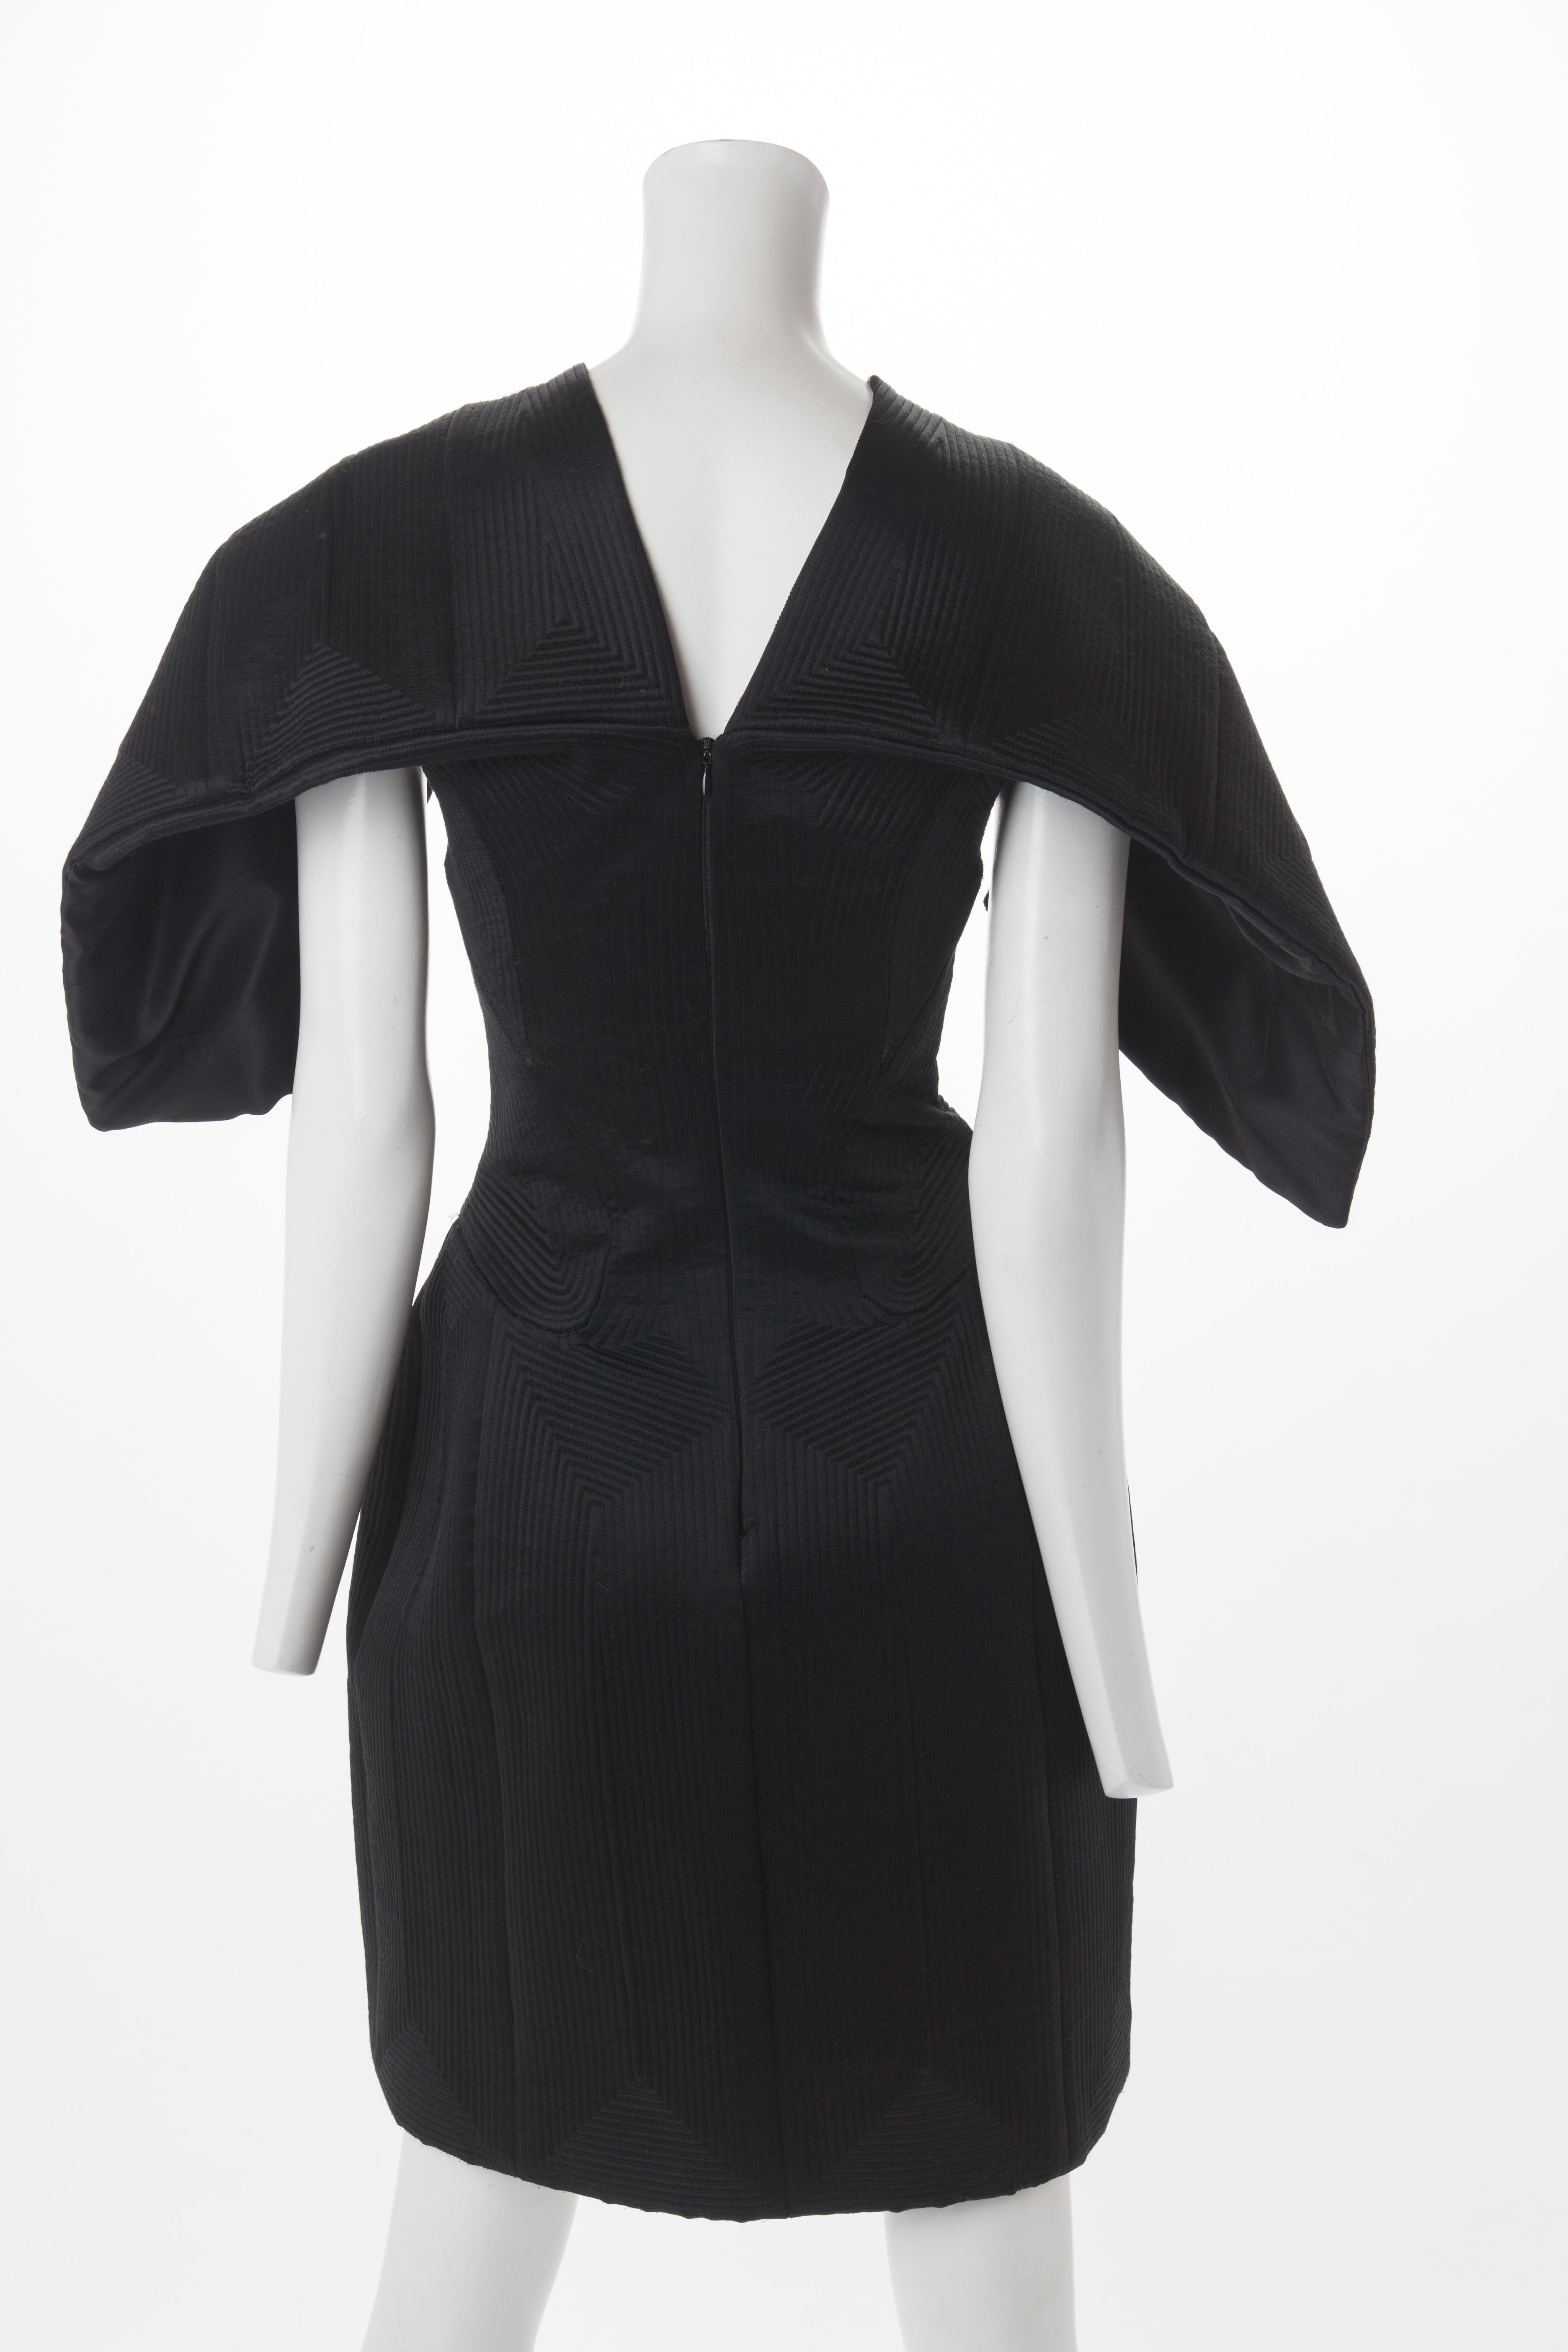 Women's Alexander McQueen Black Quilted Satin Cocktail Dress with Batwing Sleeves, 2009.